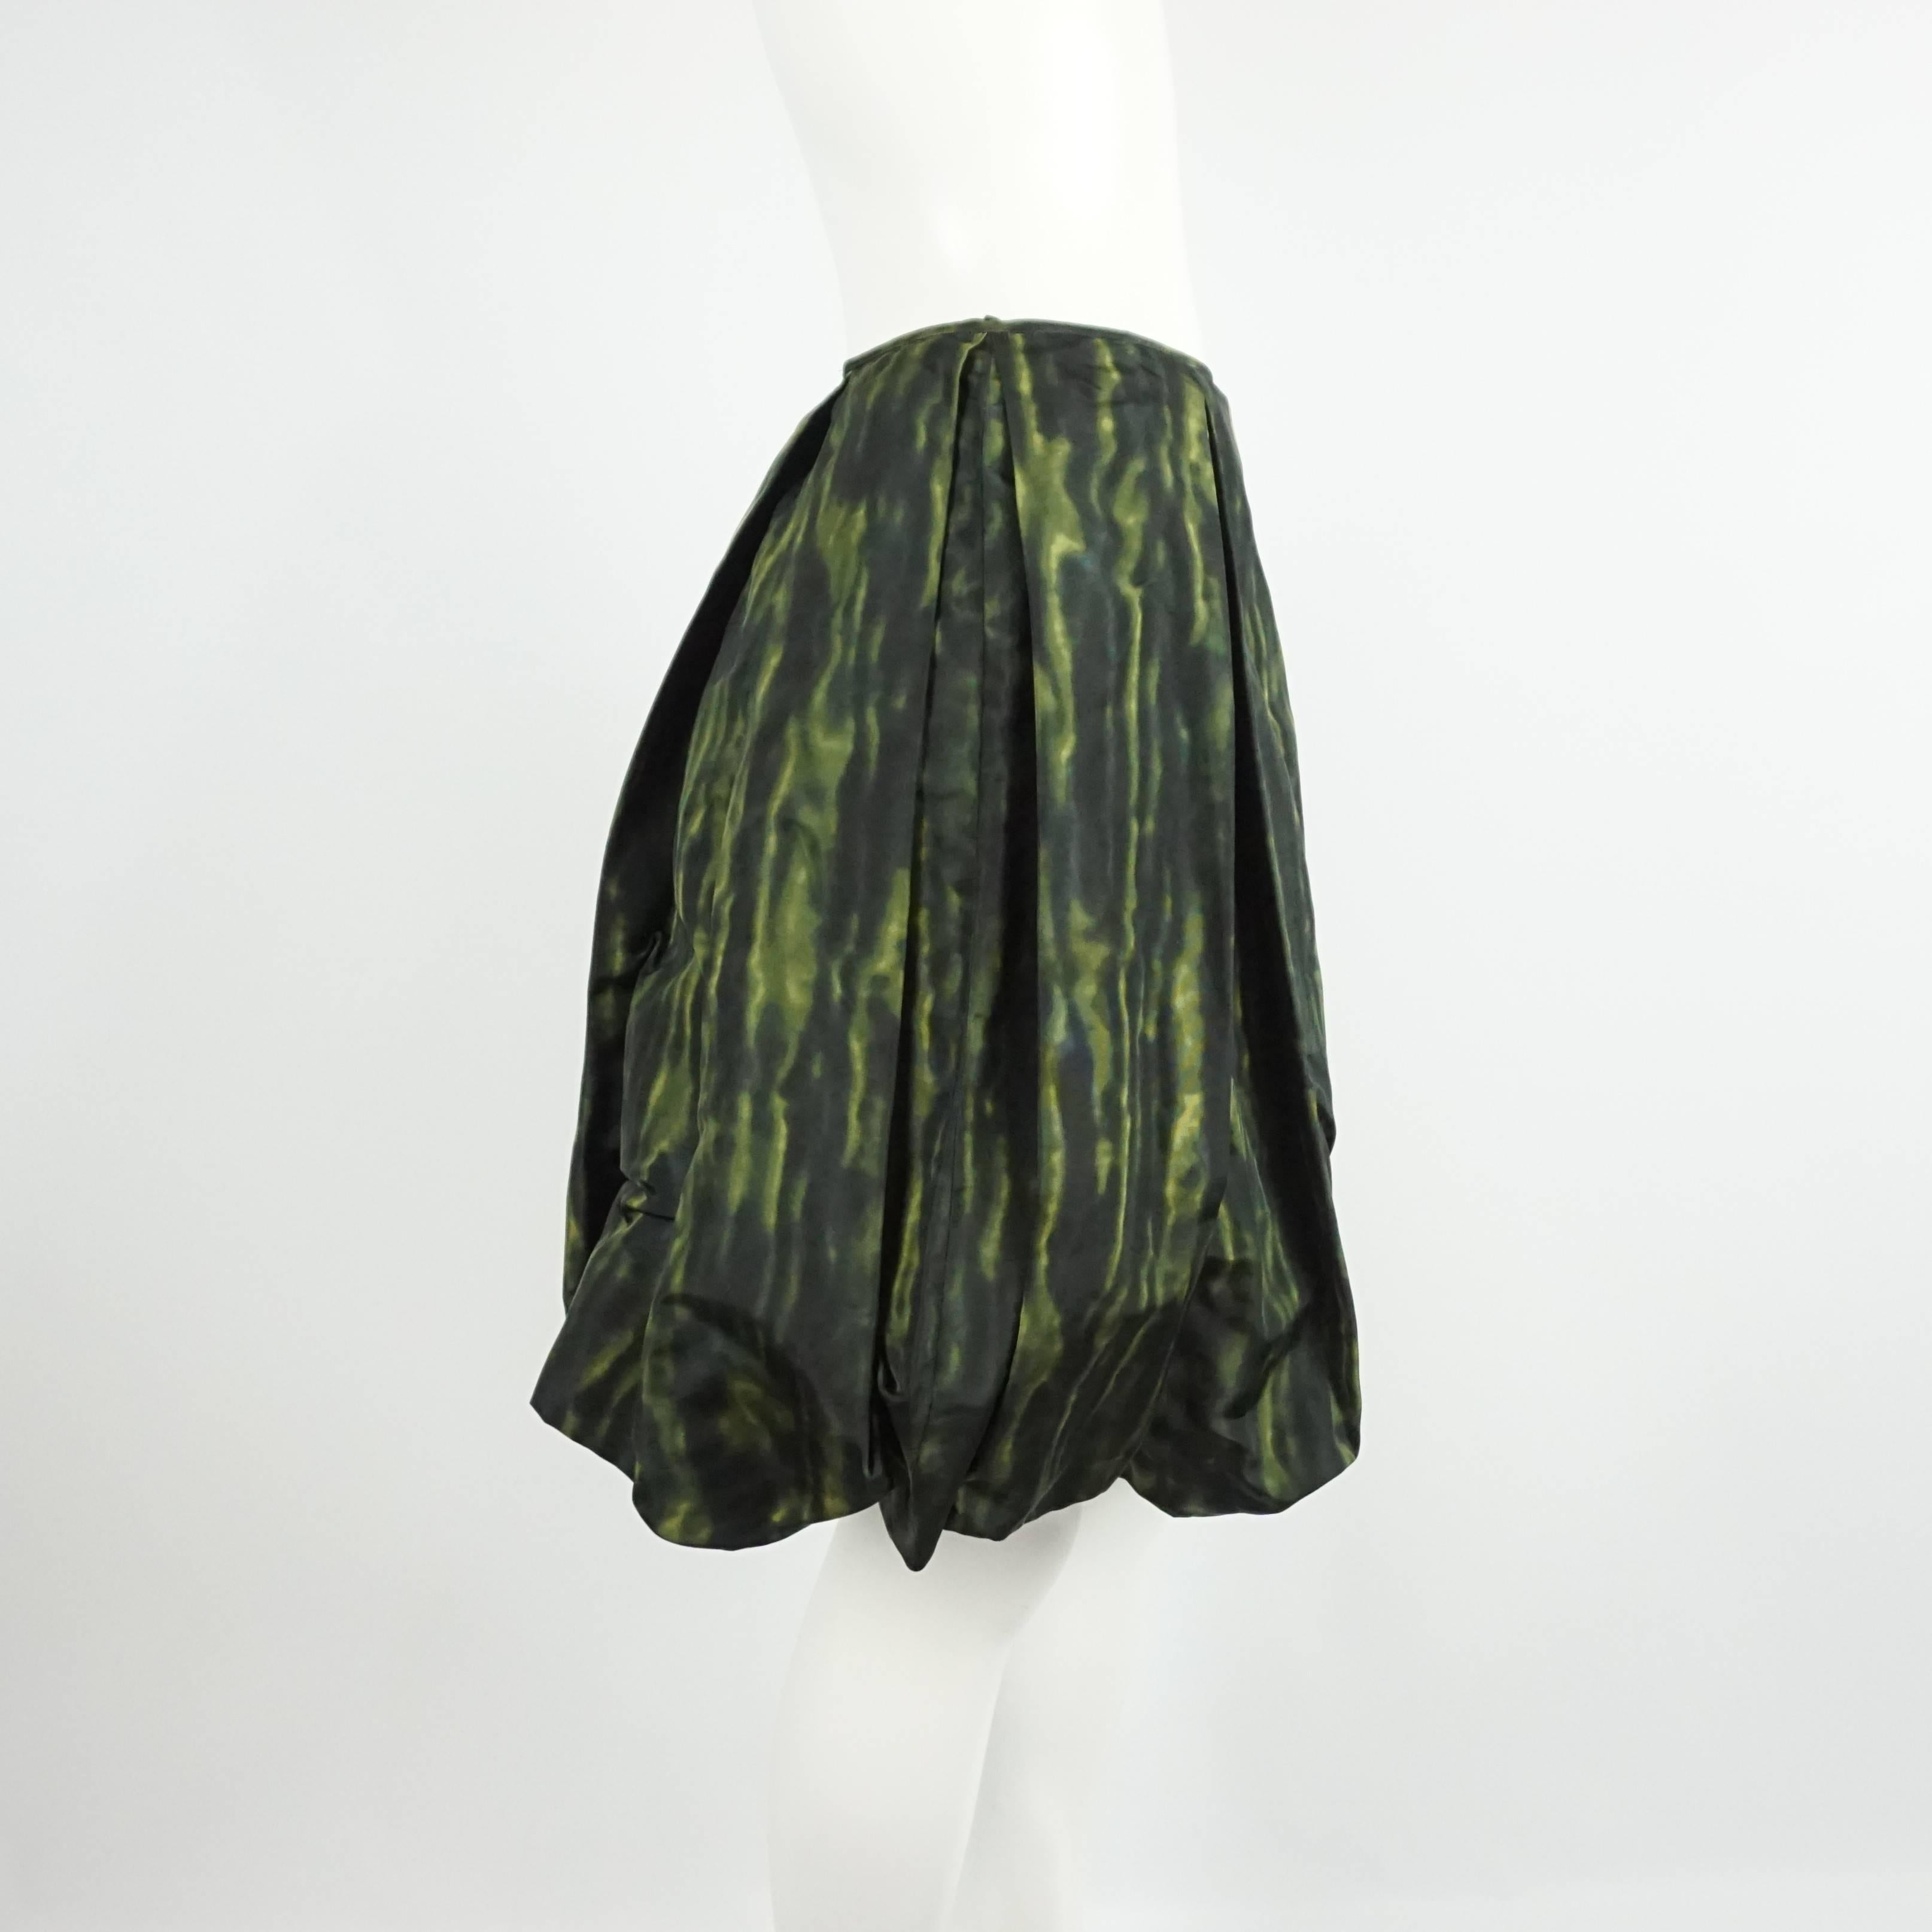 This Prada skirt is a great transition piece from summer to fall. It features a print in different hues of green, a bubble style, and large pleats. The silk taffeta skirt is in excellent condition with minimal wear. Size 44, circa 21st Century.